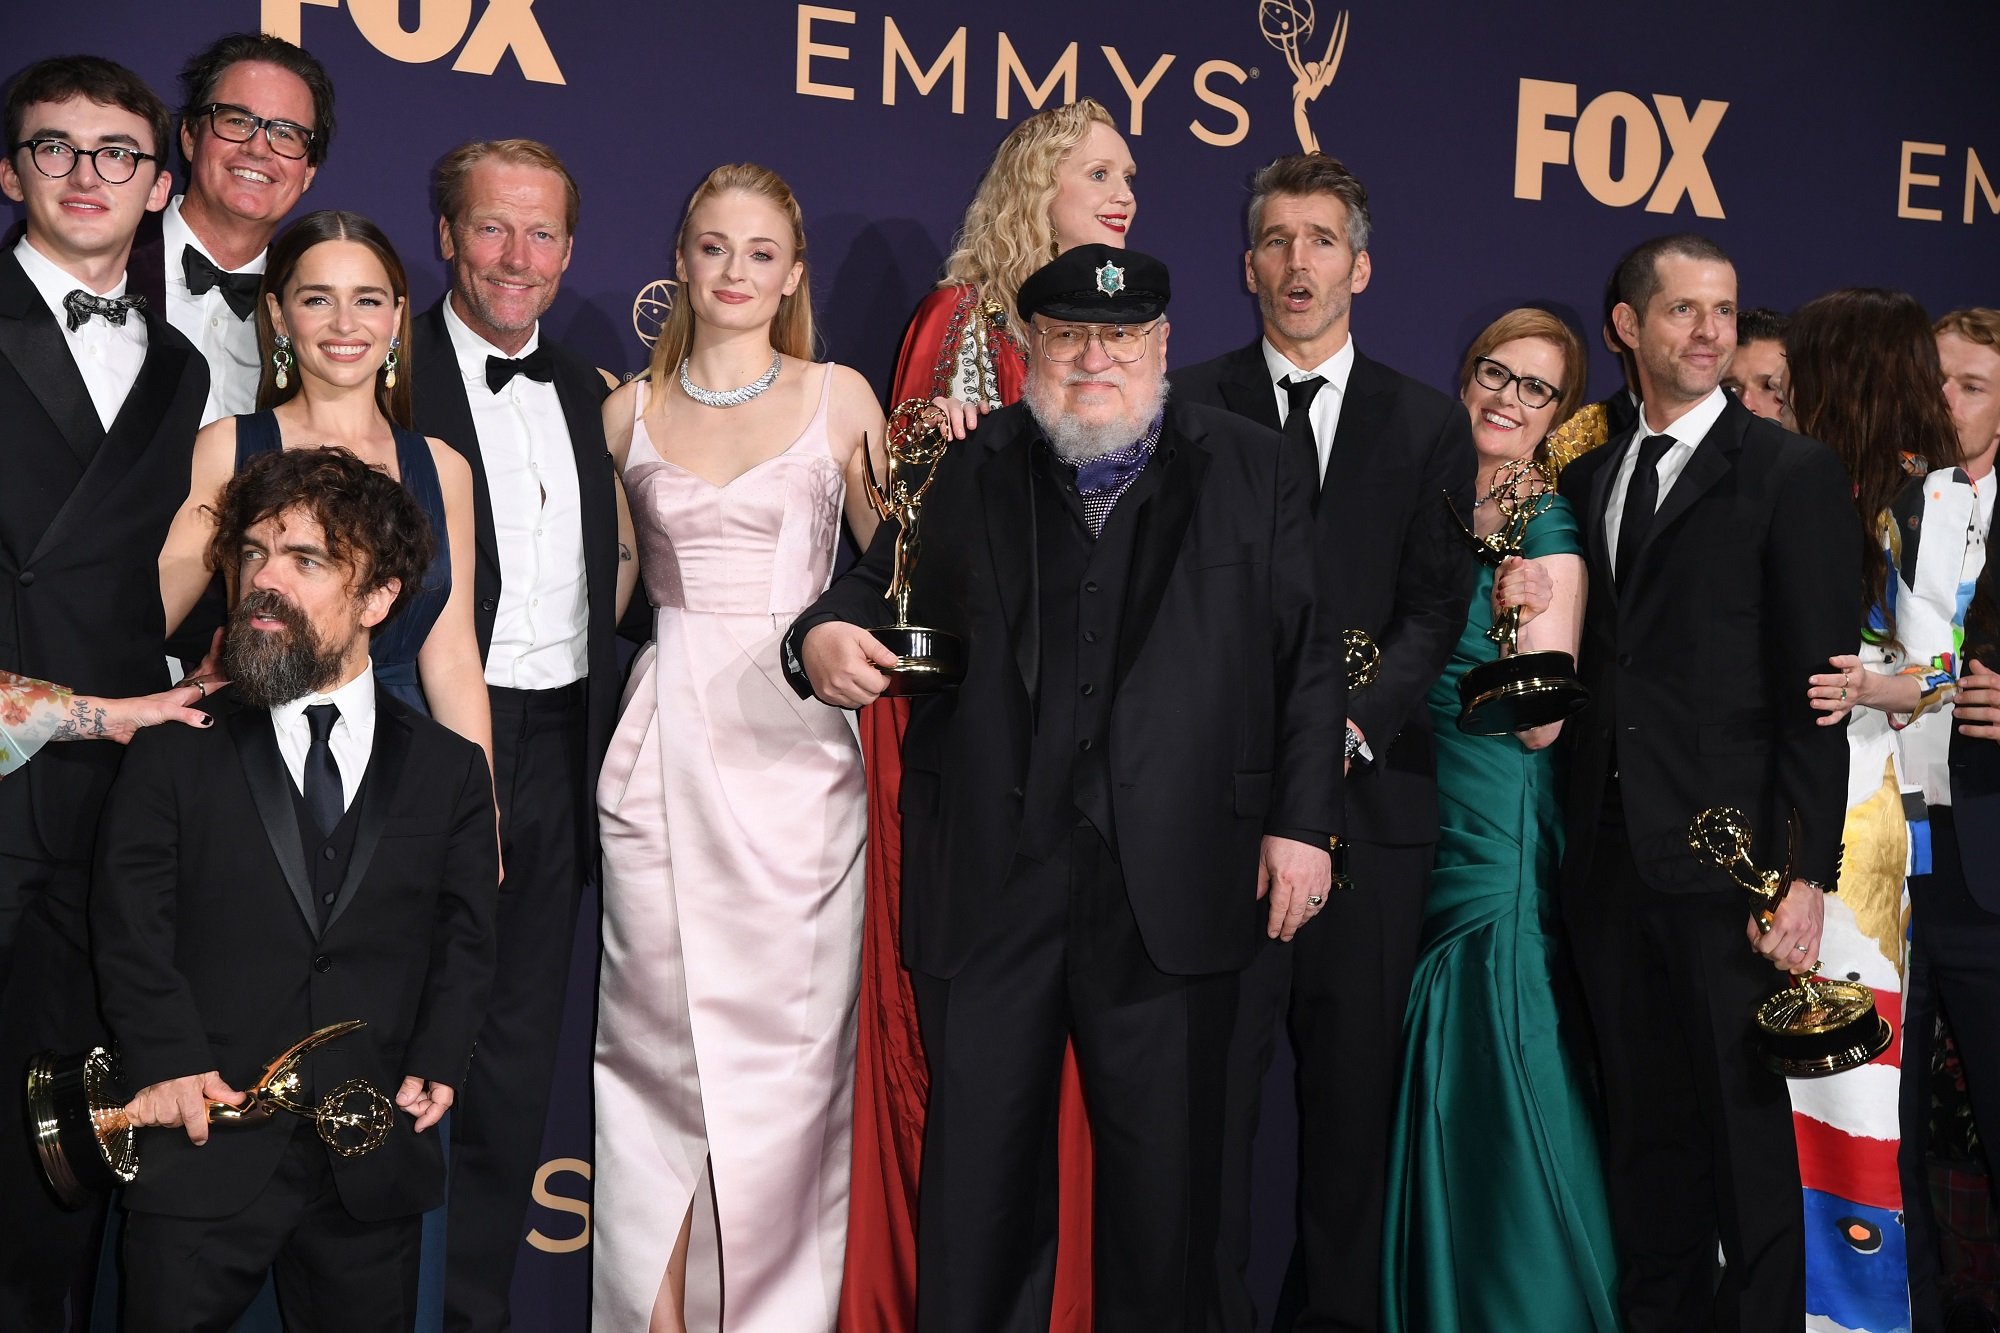 Will there be a Game of Thrones reunion?